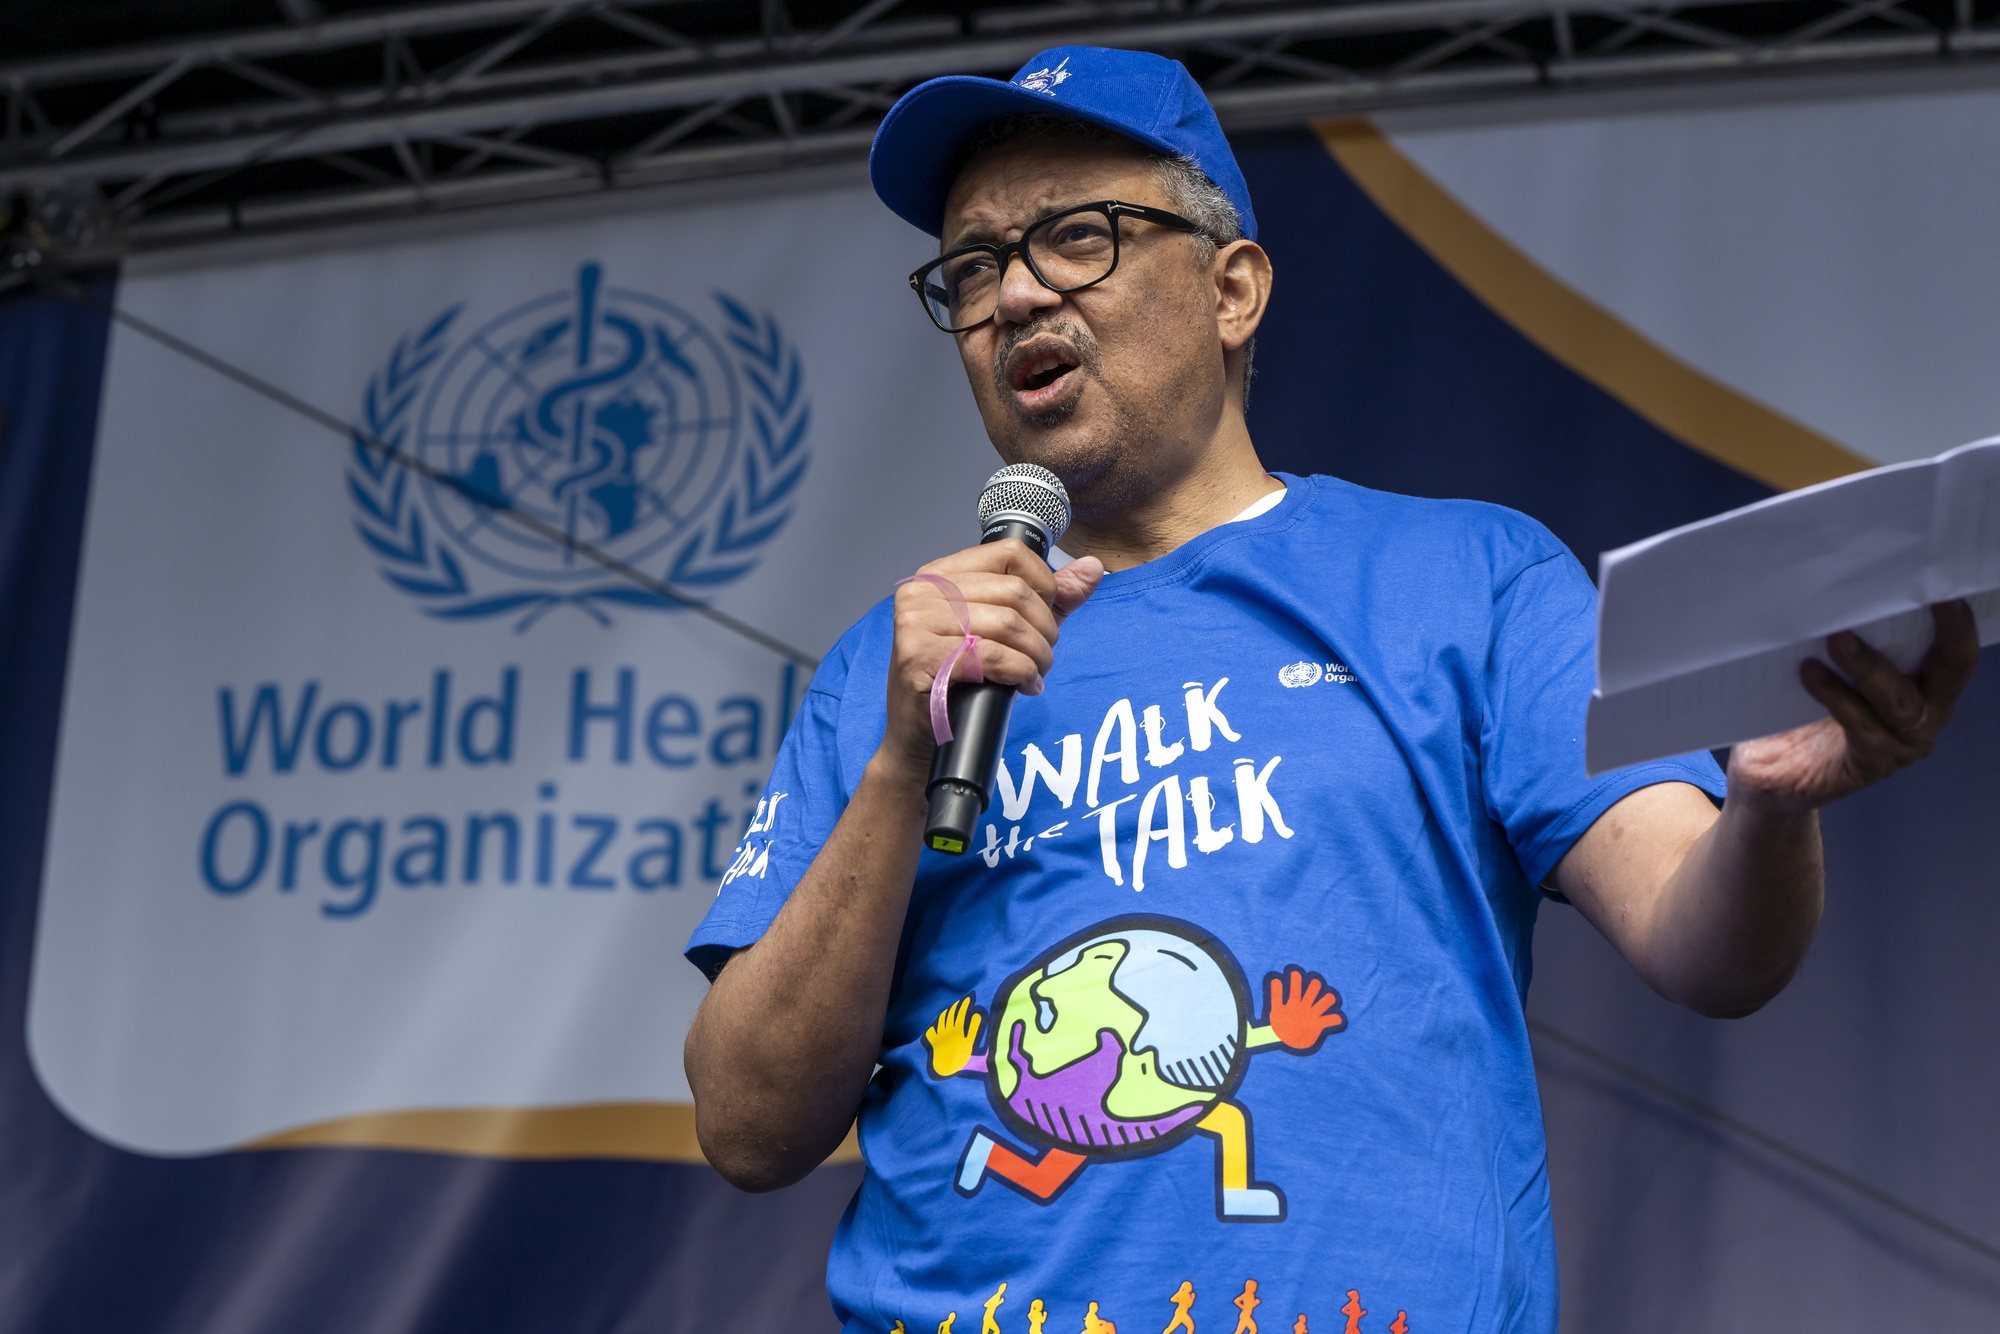 epa11371197 Tedros Adhanom Ghebreyesus, Director General of the World Health Organization (WHO), speaks during WHO&#039;s &quot;Walk the Talk&quot; 5th edition, in Geneva, Switzerland, 26 May 2024. The Walk the Talk: Health for All Challenge was held in Geneva to provide a healthy kickstart to the Seventy-seventh World Health Assembly.  EPA/MARTIAL TREZZINI